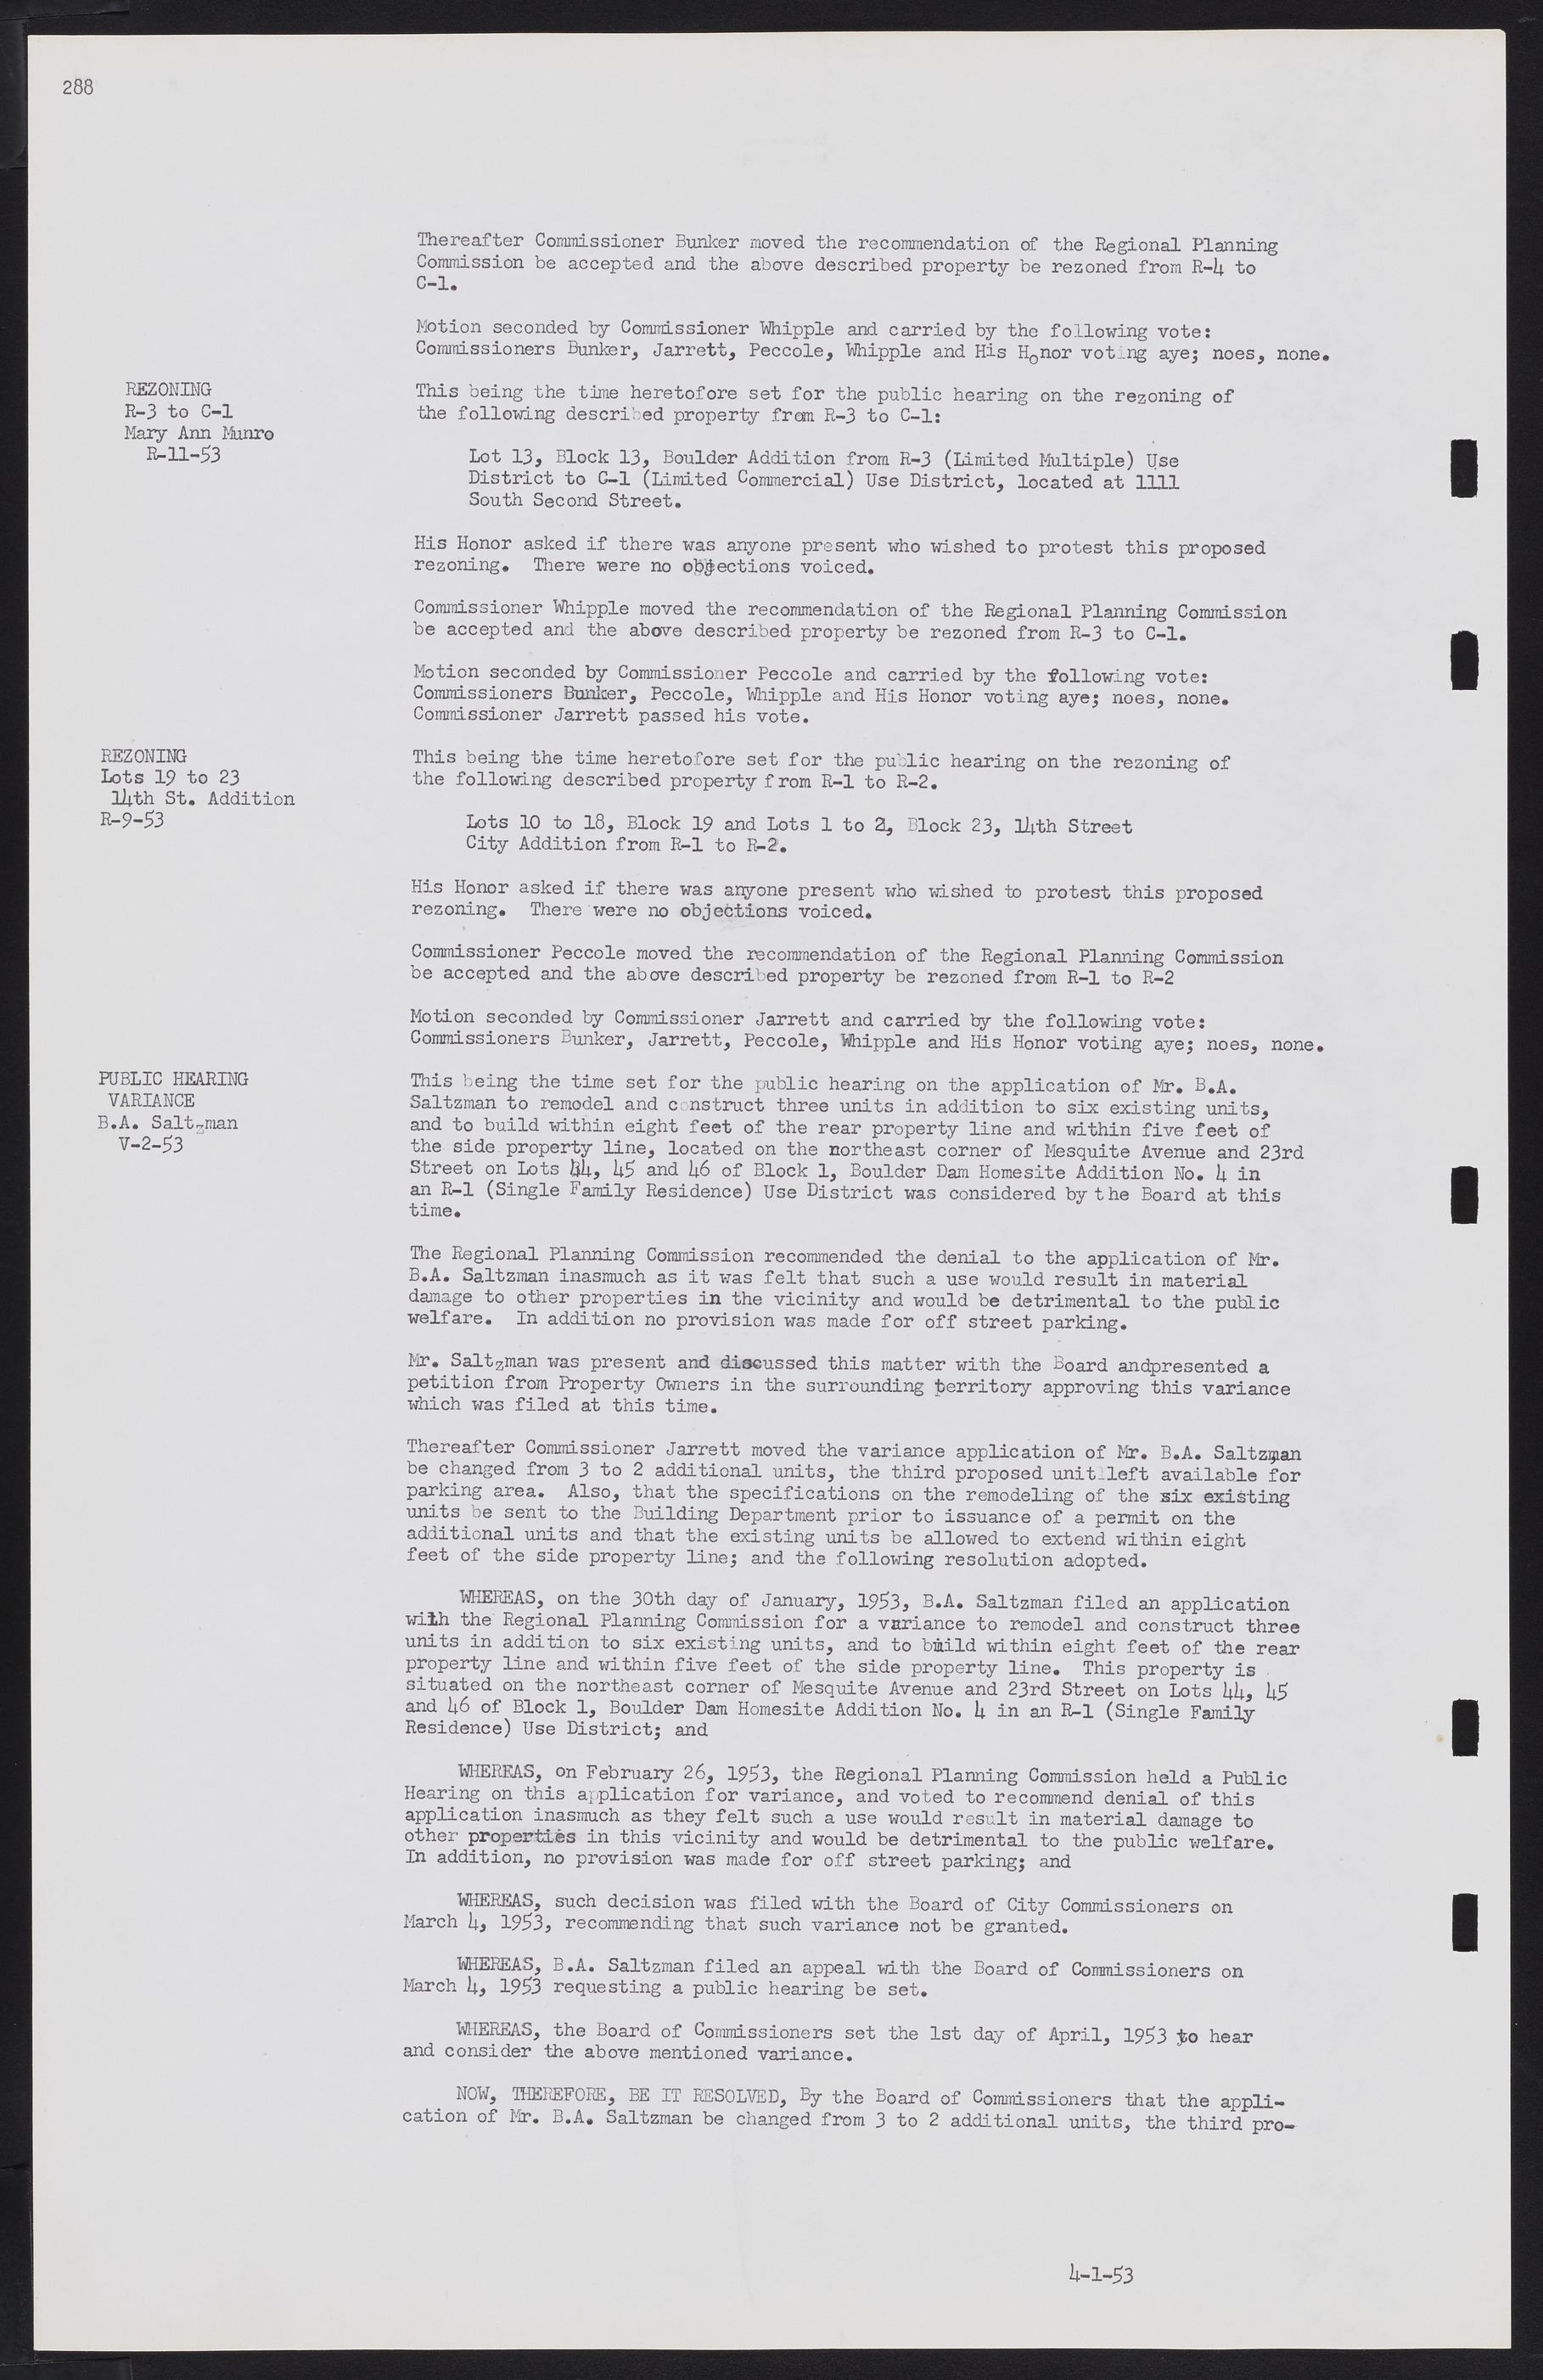 Las Vegas City Commission Minutes, May 26, 1952 to February 17, 1954, lvc000008-316